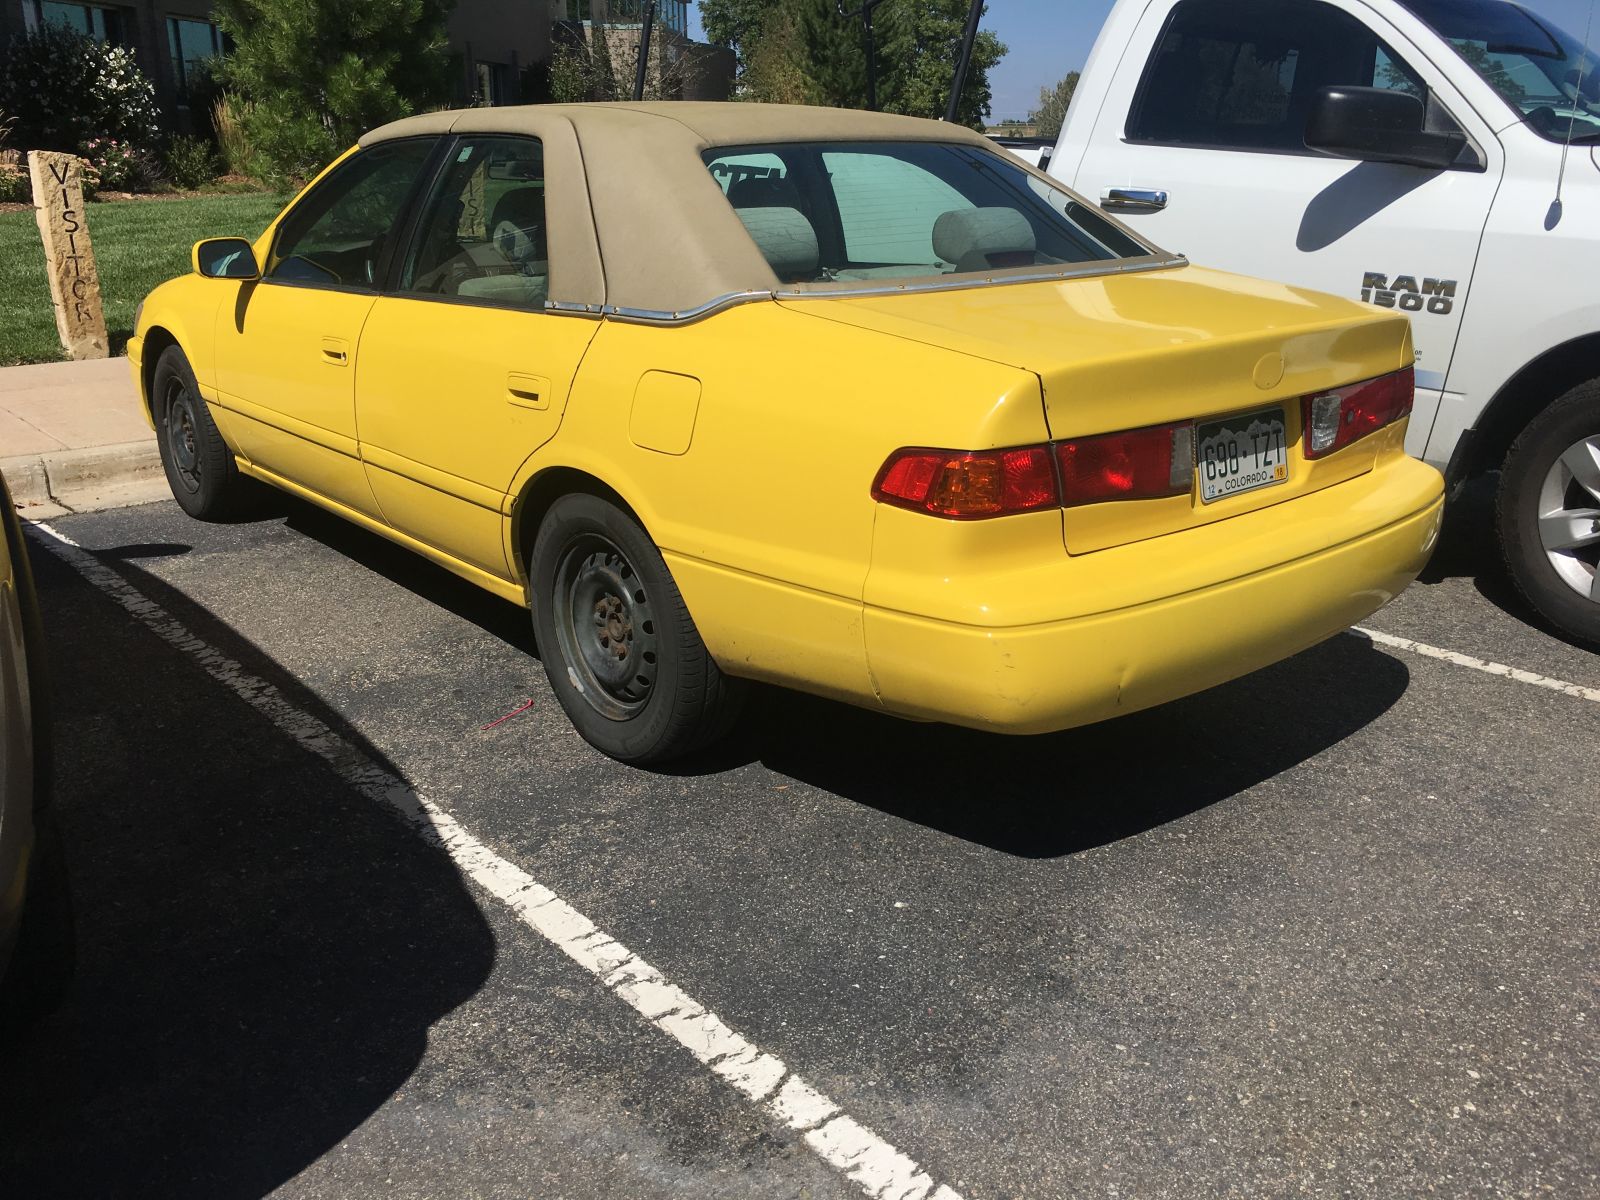 A yellow-resprayed, landau-roofed Camry. Why.